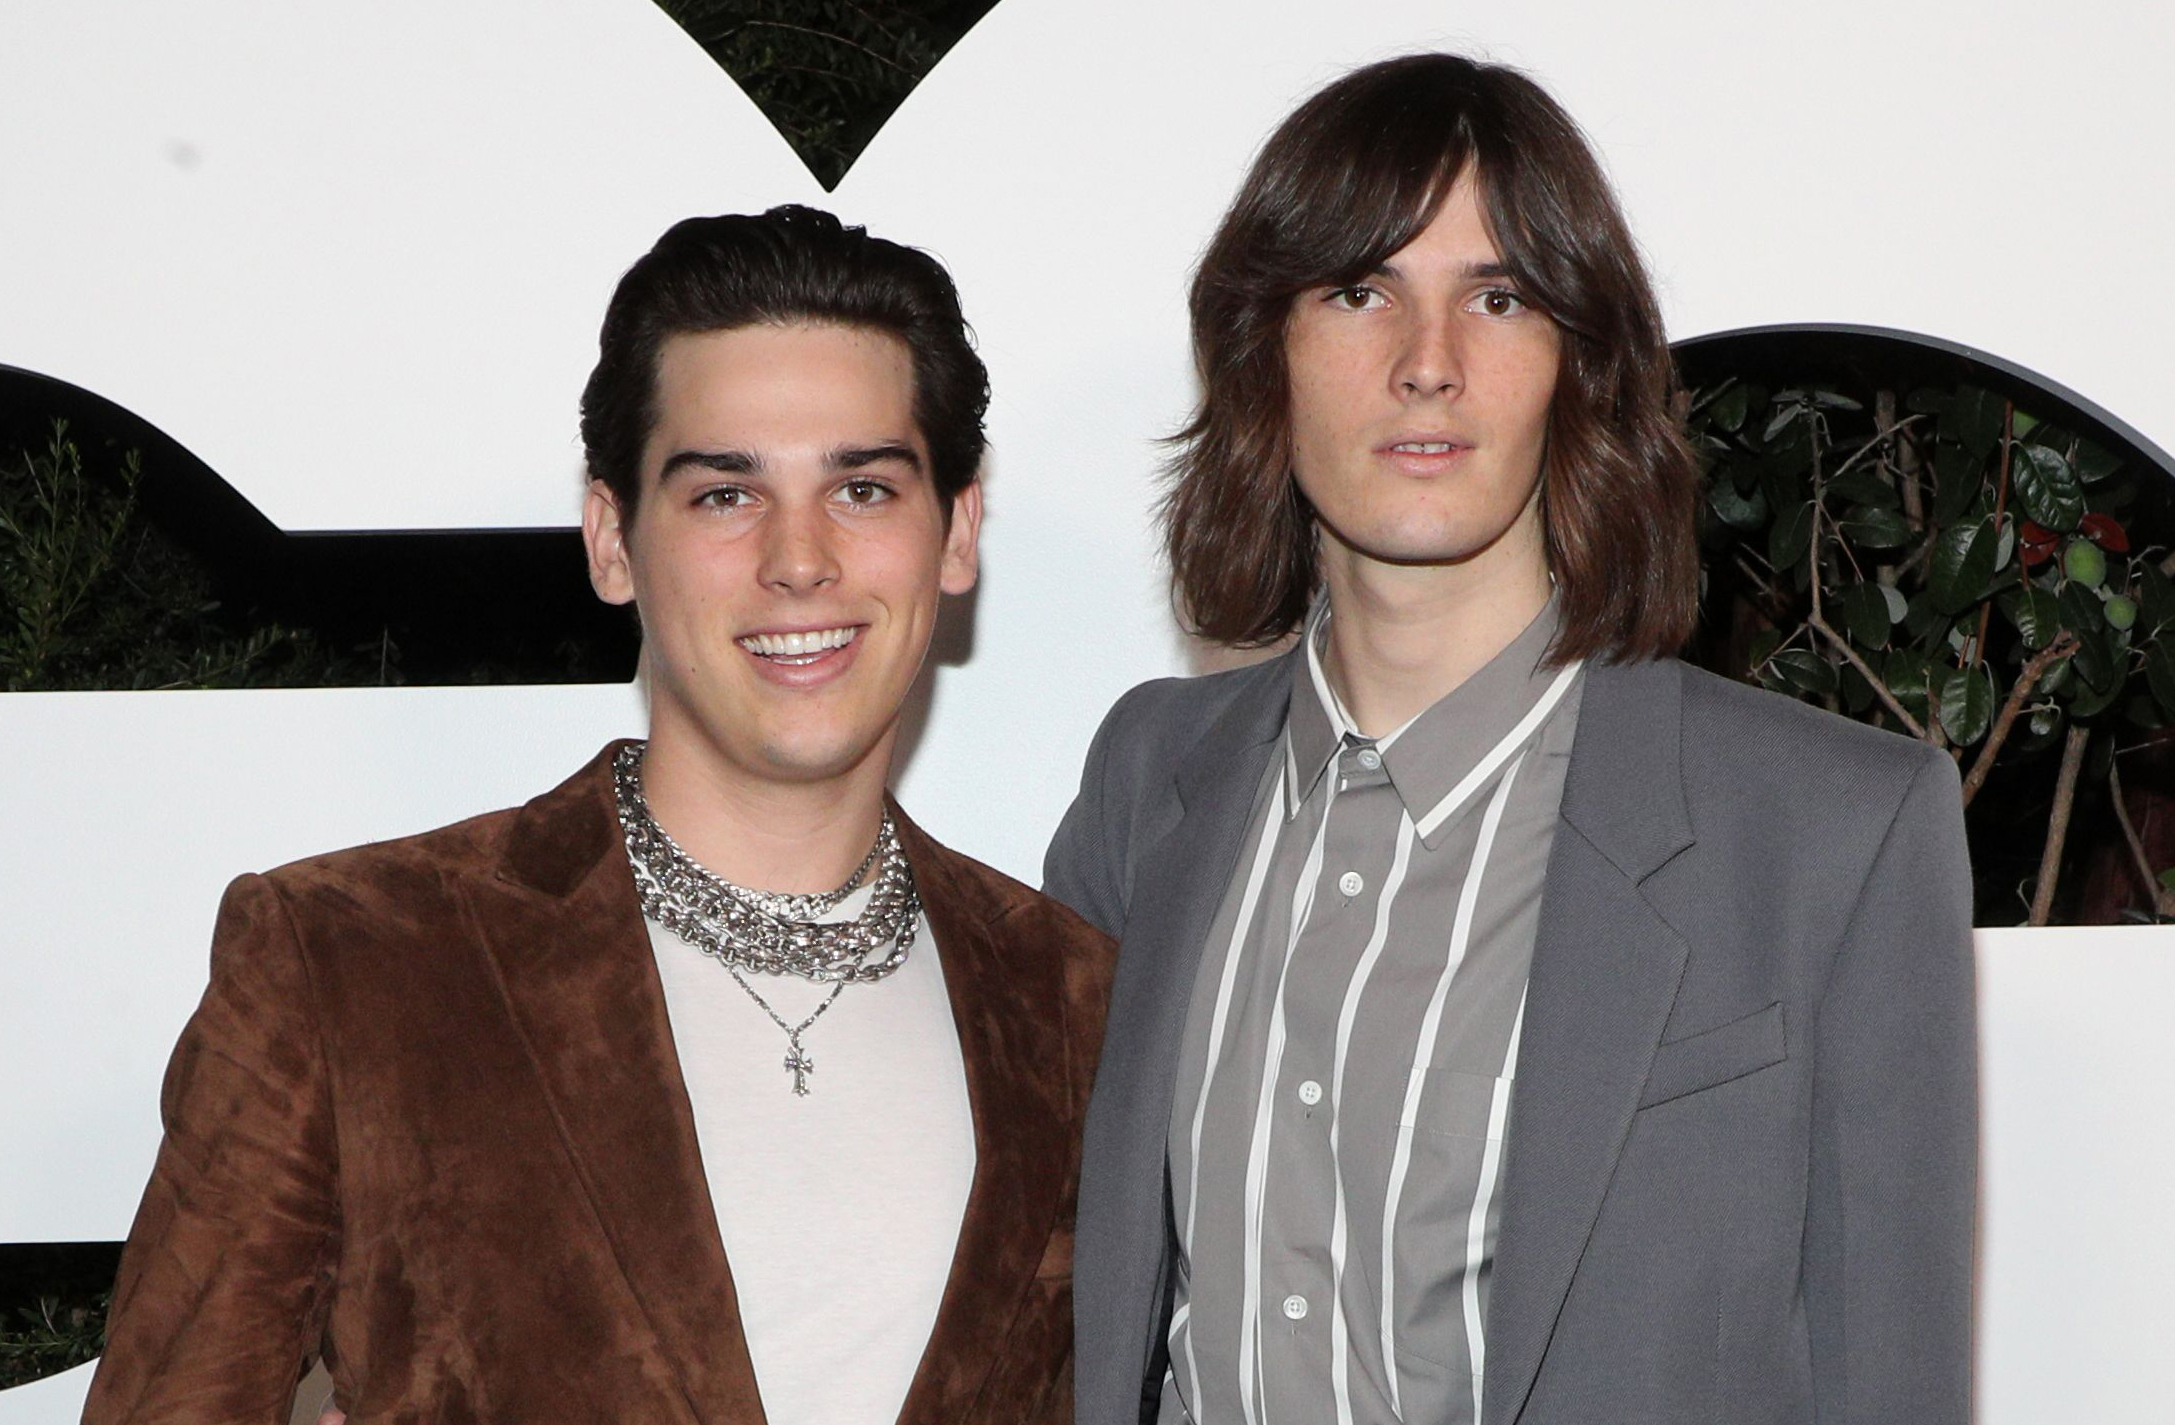 <p>Paris Brosnan (left, who was born in 2001) is seen here with big brother Dylan Brosnan (who was born in 1997), posing on the red carpet at the GQ Men of the Year event in Los Angeles in November 2021. The siblings, who've both worked as models, <a href="https://www.wonderwall.com/awards-events/golden-globes/2020-golden-globe-awards-what-has-everyone-talking-whats-buzzing-trending-3021935.gallery?photoId=1070386">served as Golden Globes Ambassadors in 2020</a>.</p>